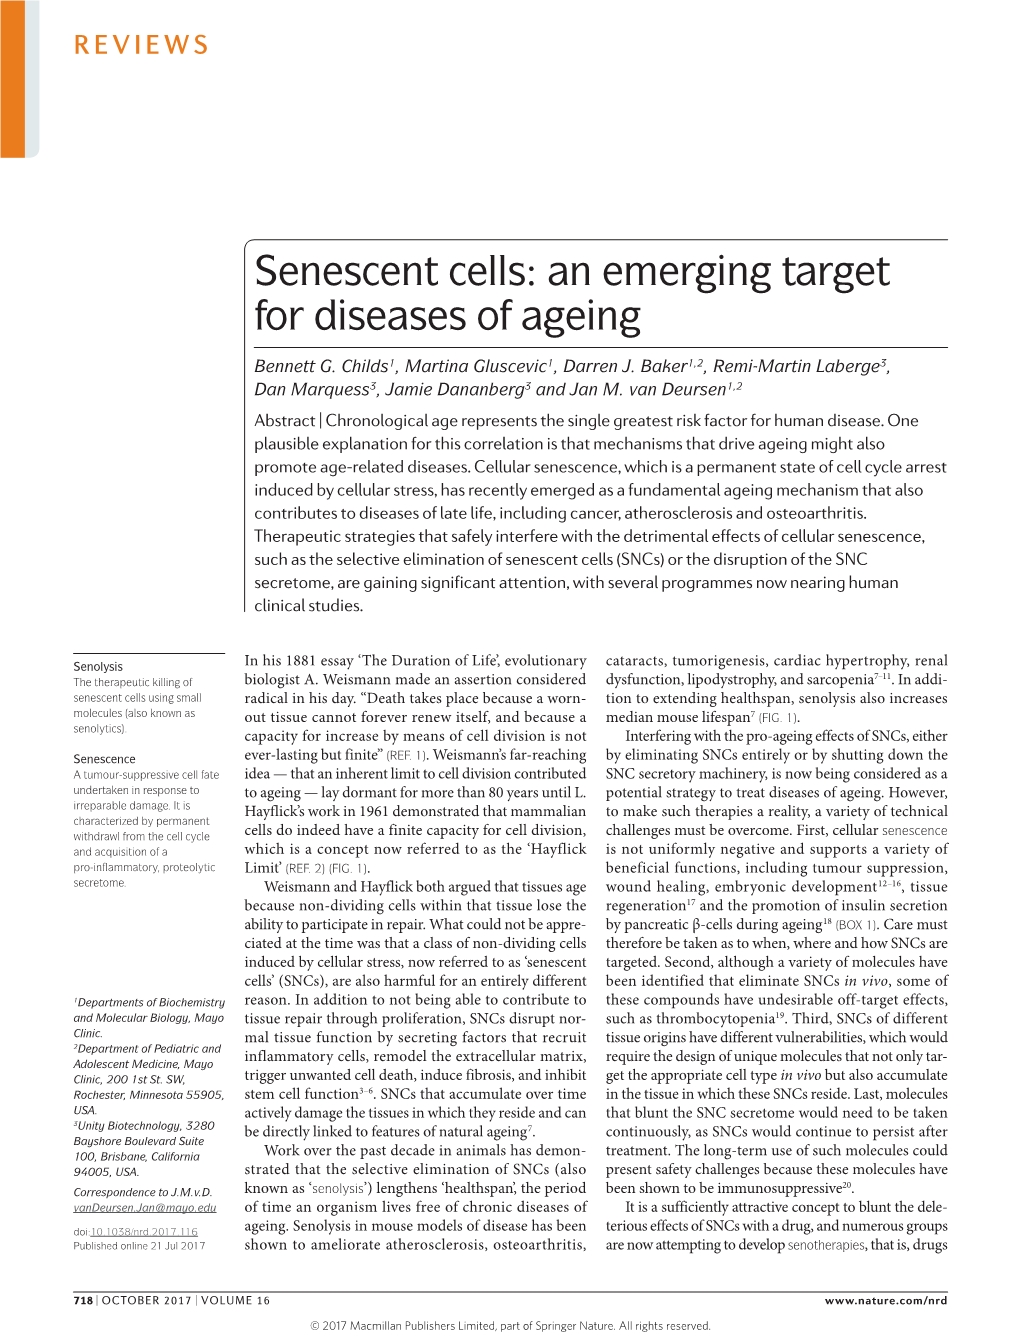 Senescent Cells: an Emerging Target for Diseases of Ageing